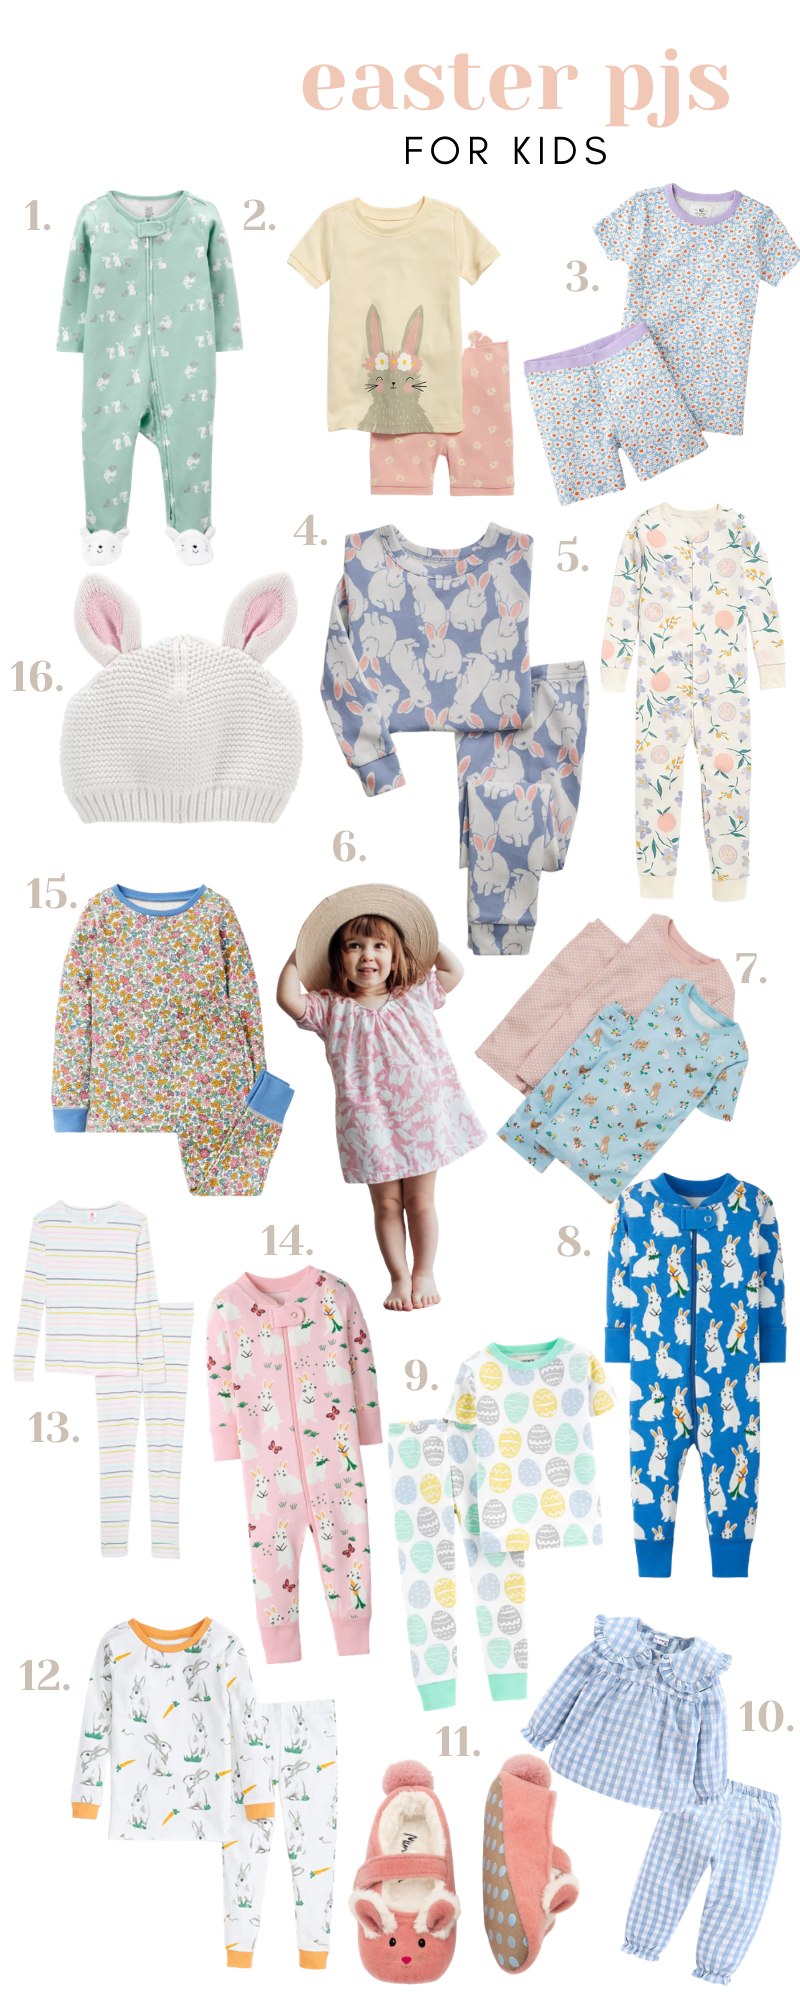 2021 Easter PJs For Kids - The Mama Notes